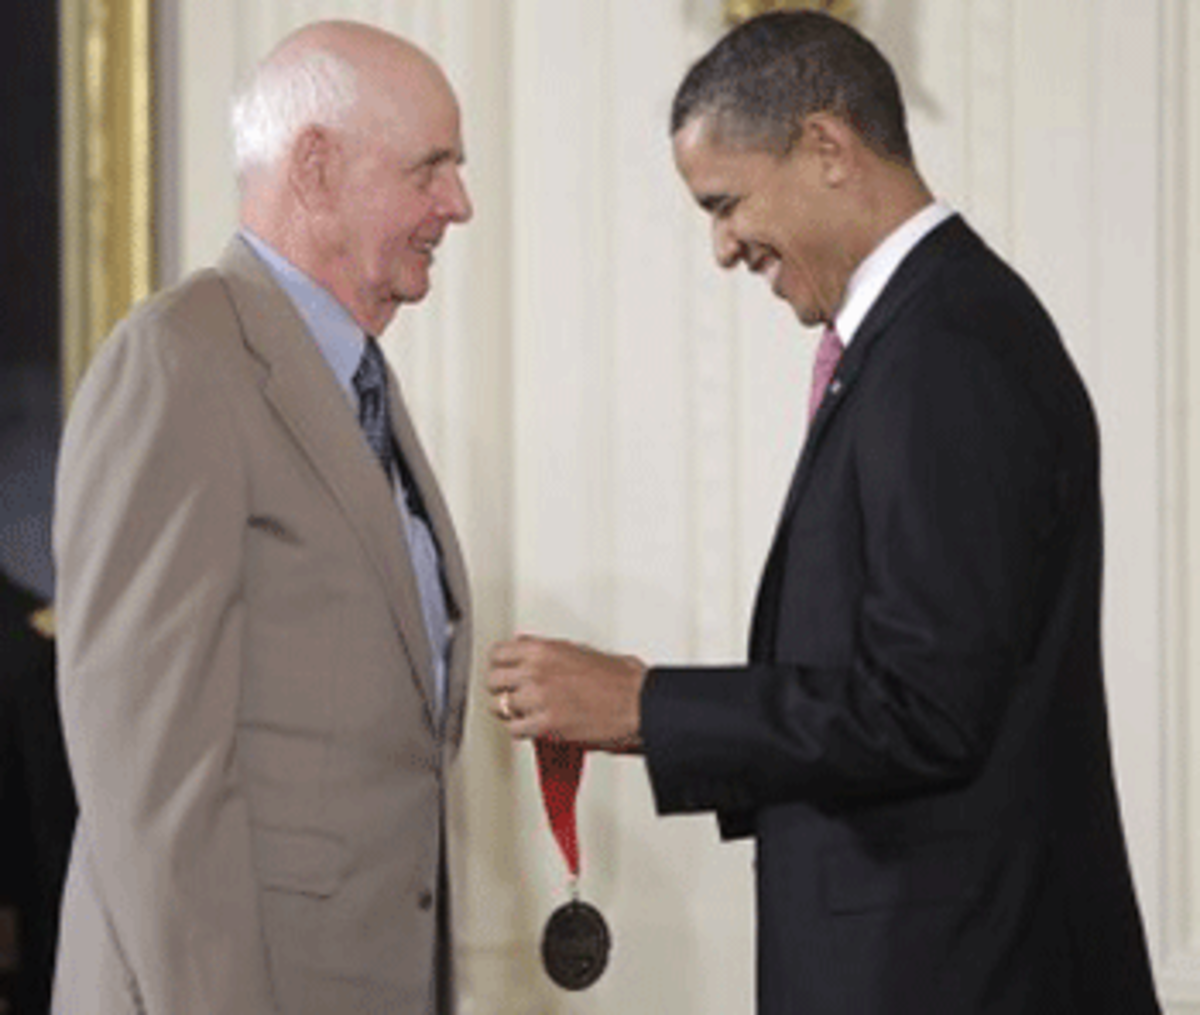 Wendell Berry and President Obama